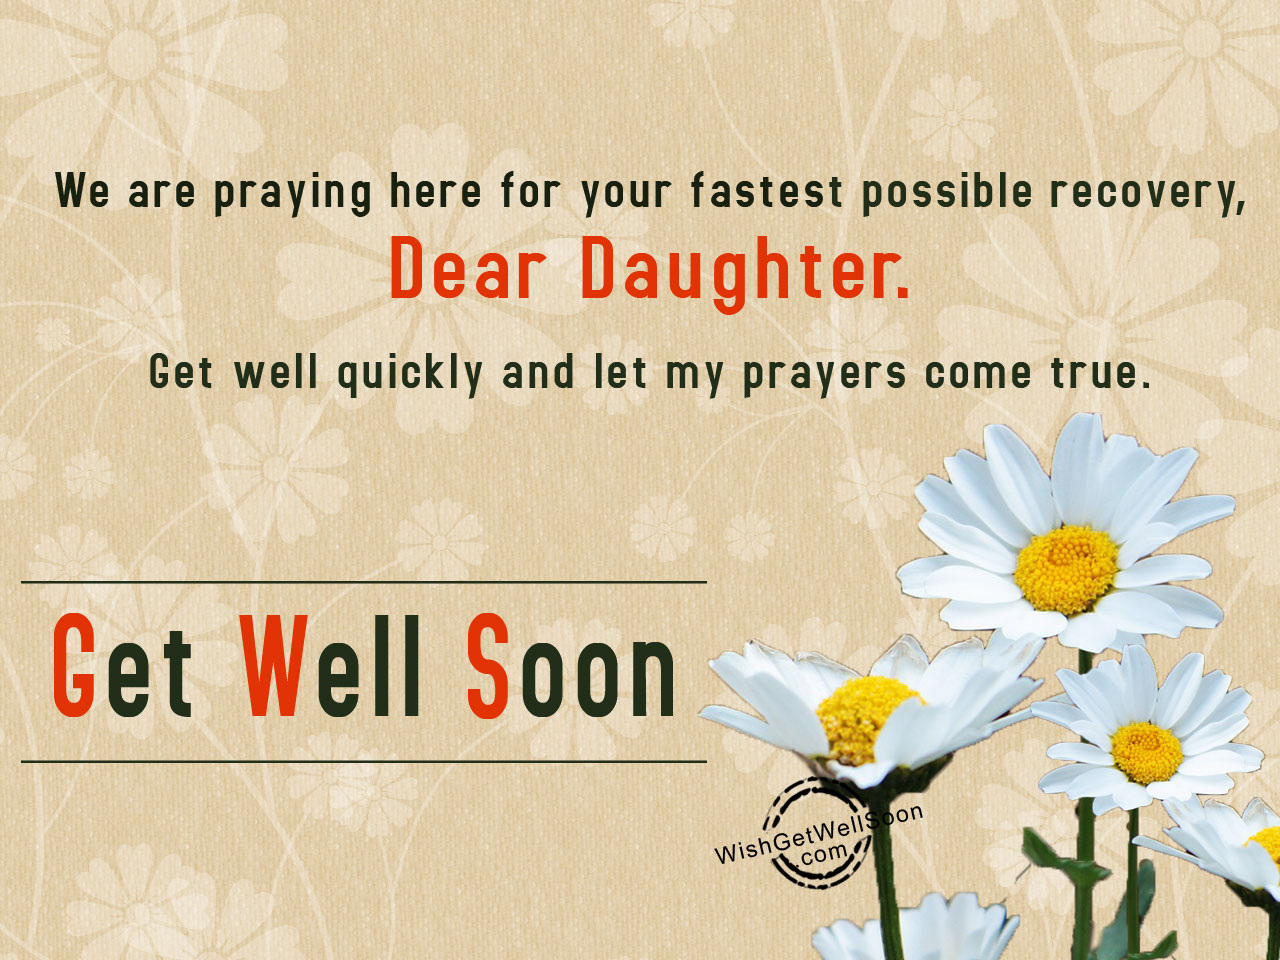 We are praying for your possible recovery